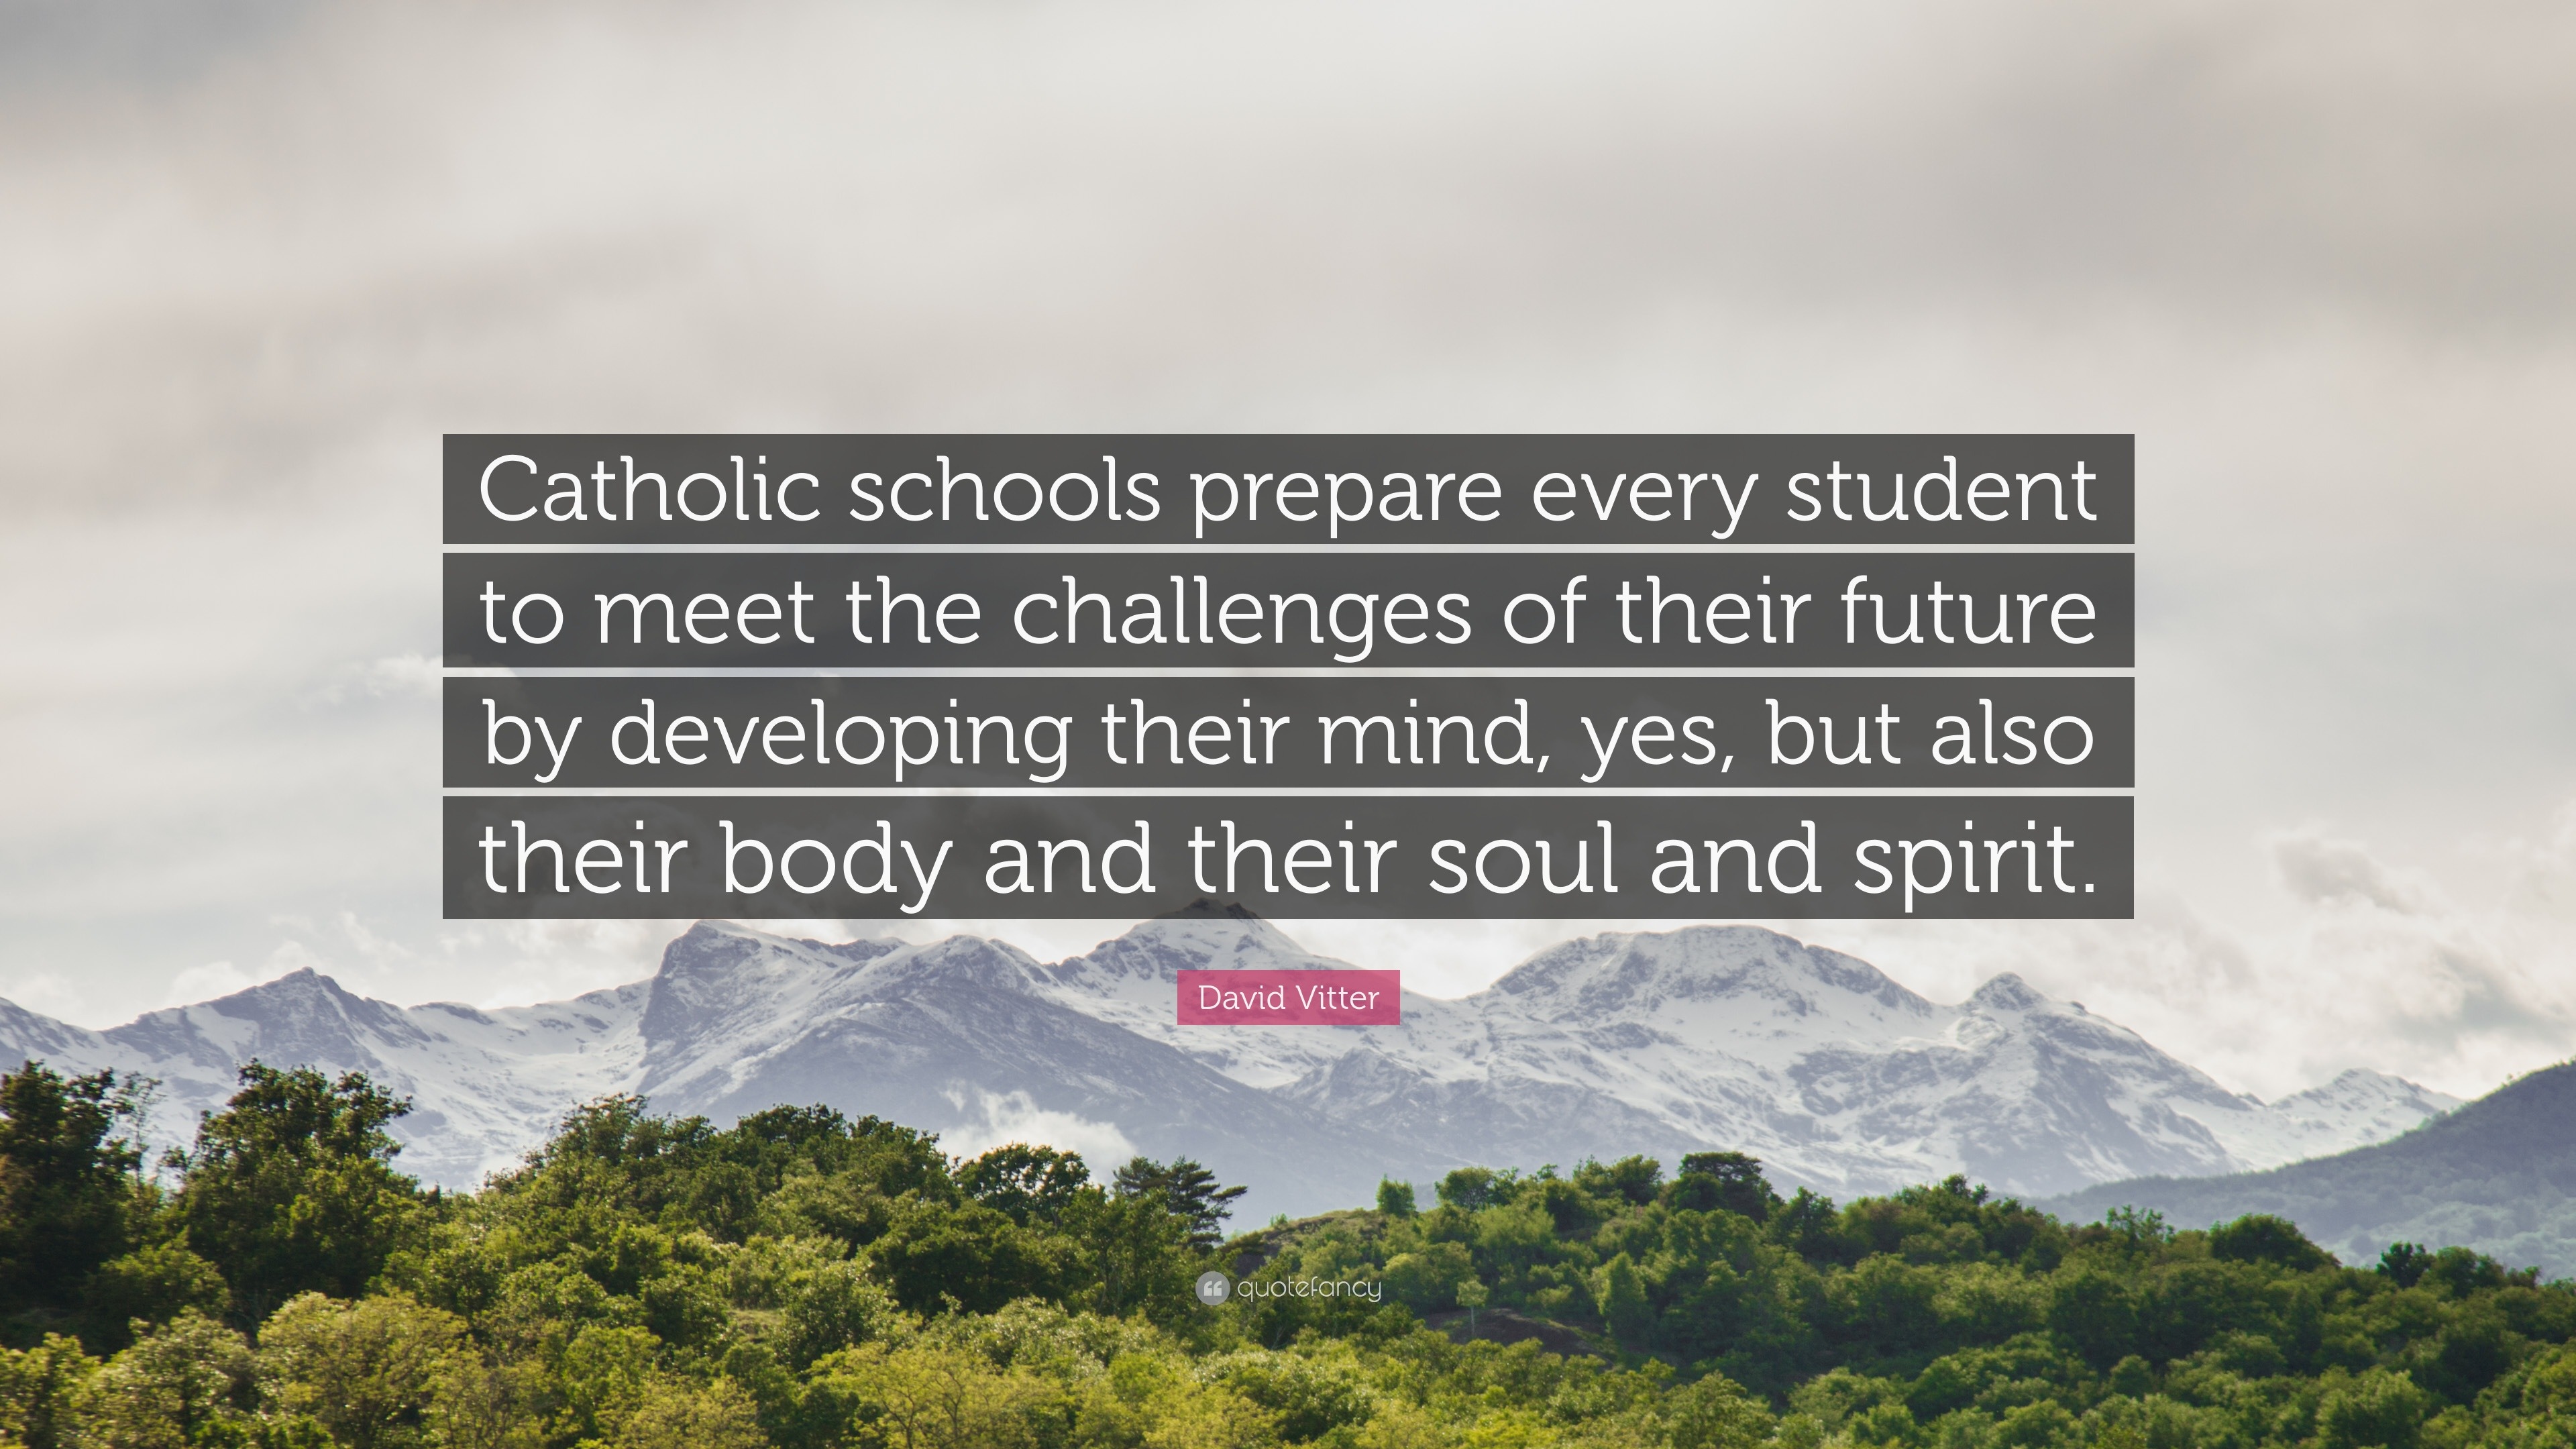 David Vitter Quote: “Catholic schools prepare every student to meet the  challenges of their future by developing their mind, yes, but also th...”